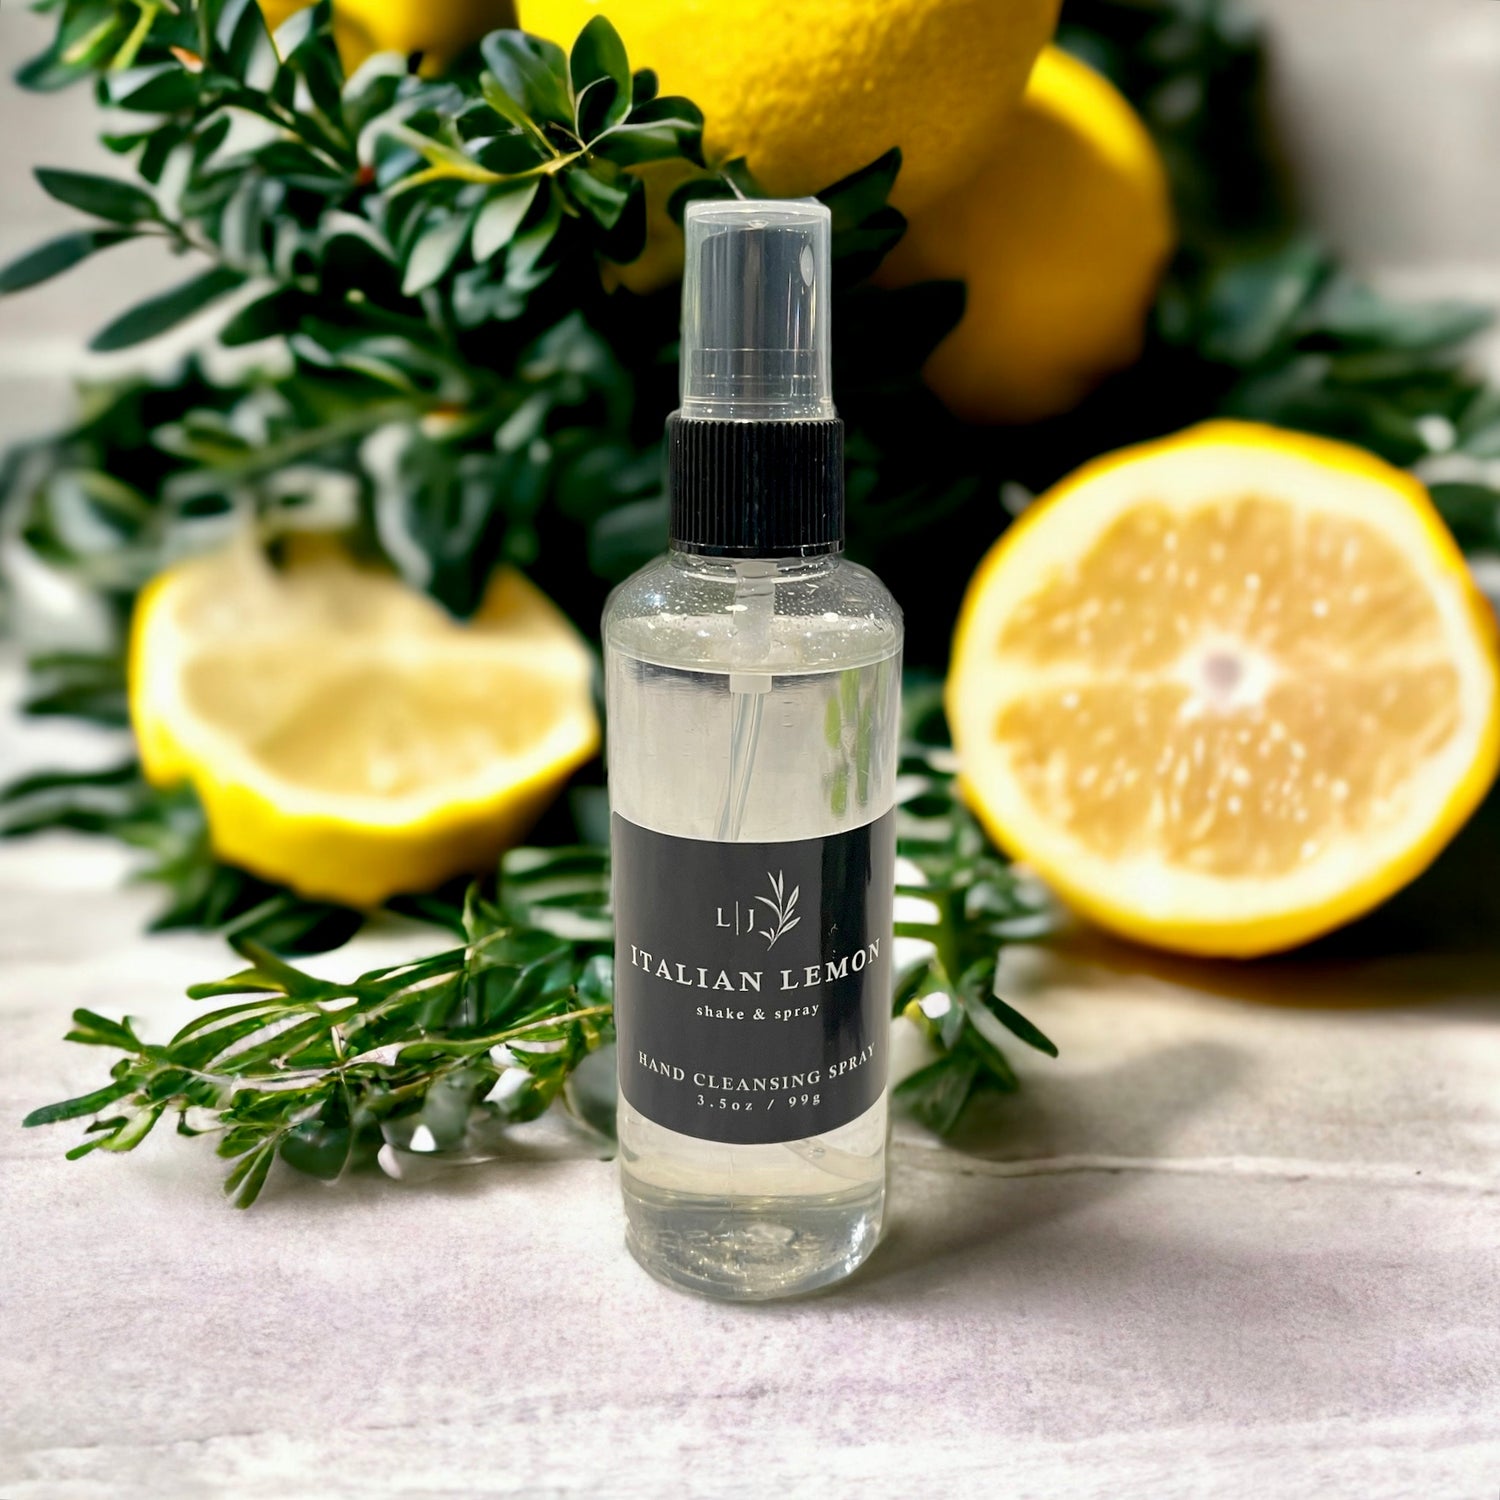 Hand Cleansing Spray